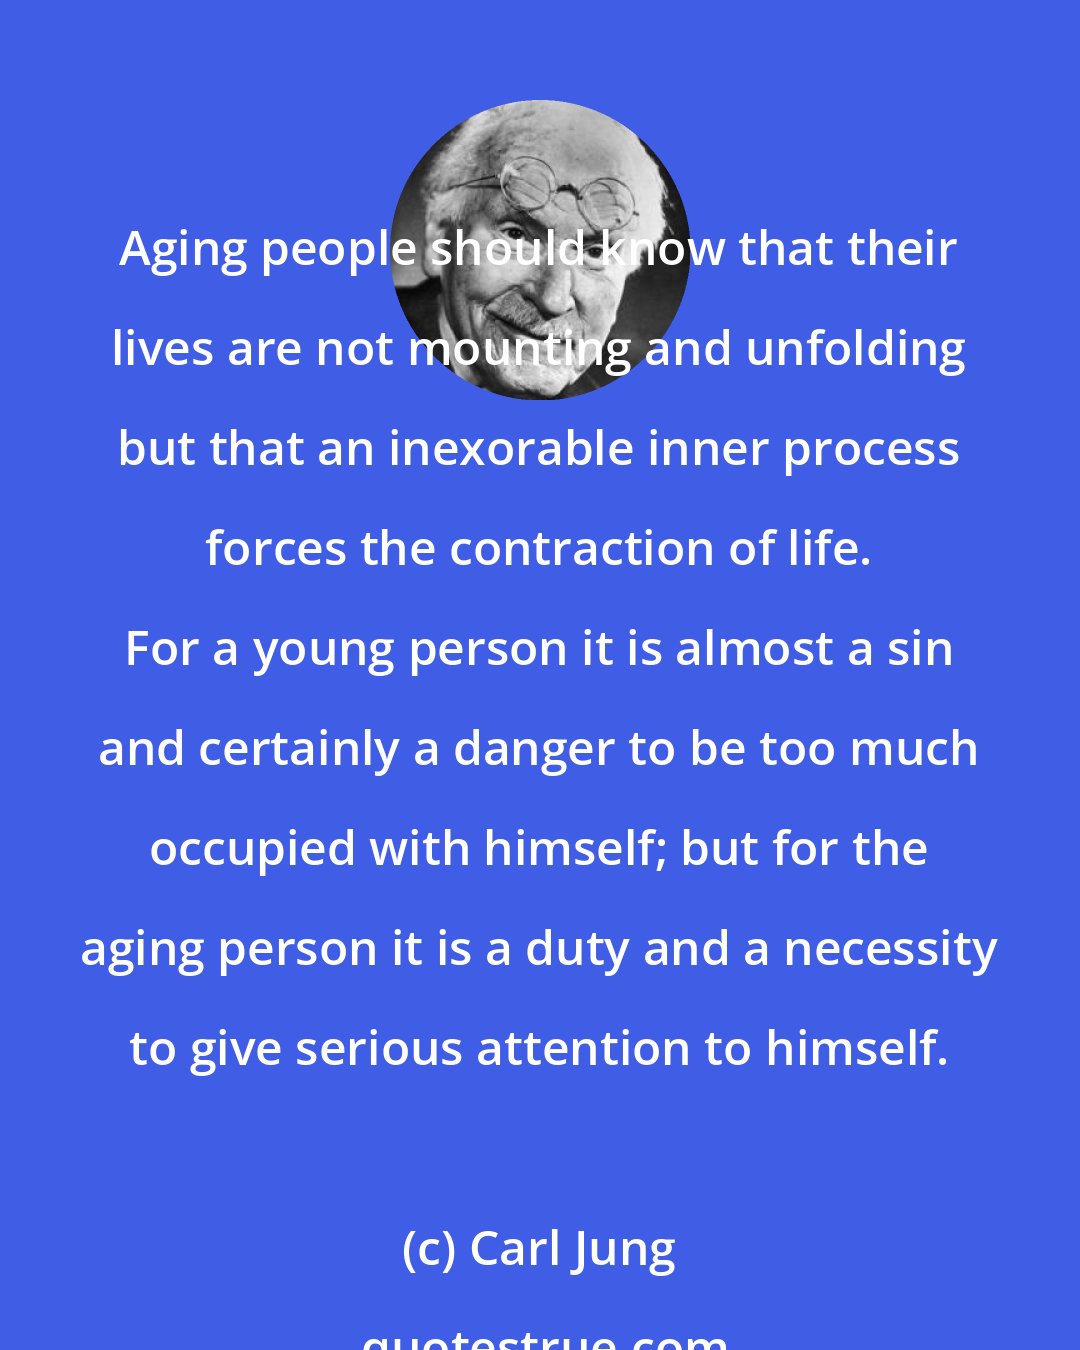 Carl Jung: Aging people should know that their lives are not mounting and unfolding but that an inexorable inner process forces the contraction of life. For a young person it is almost a sin and certainly a danger to be too much occupied with himself; but for the aging person it is a duty and a necessity to give serious attention to himself.